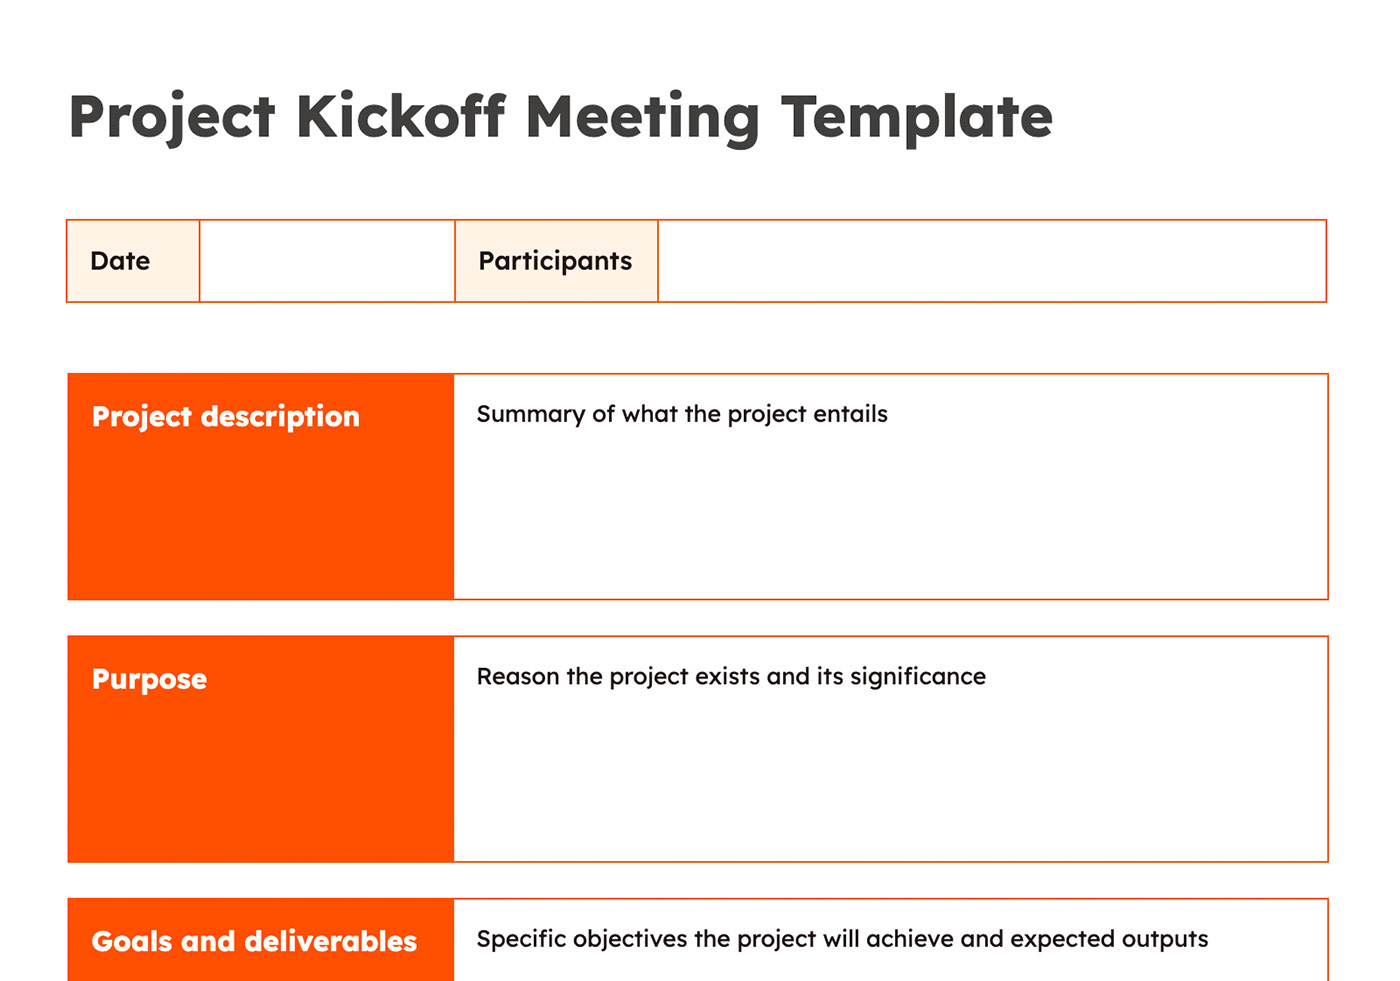 Screenshot of a project kickoff meeting template